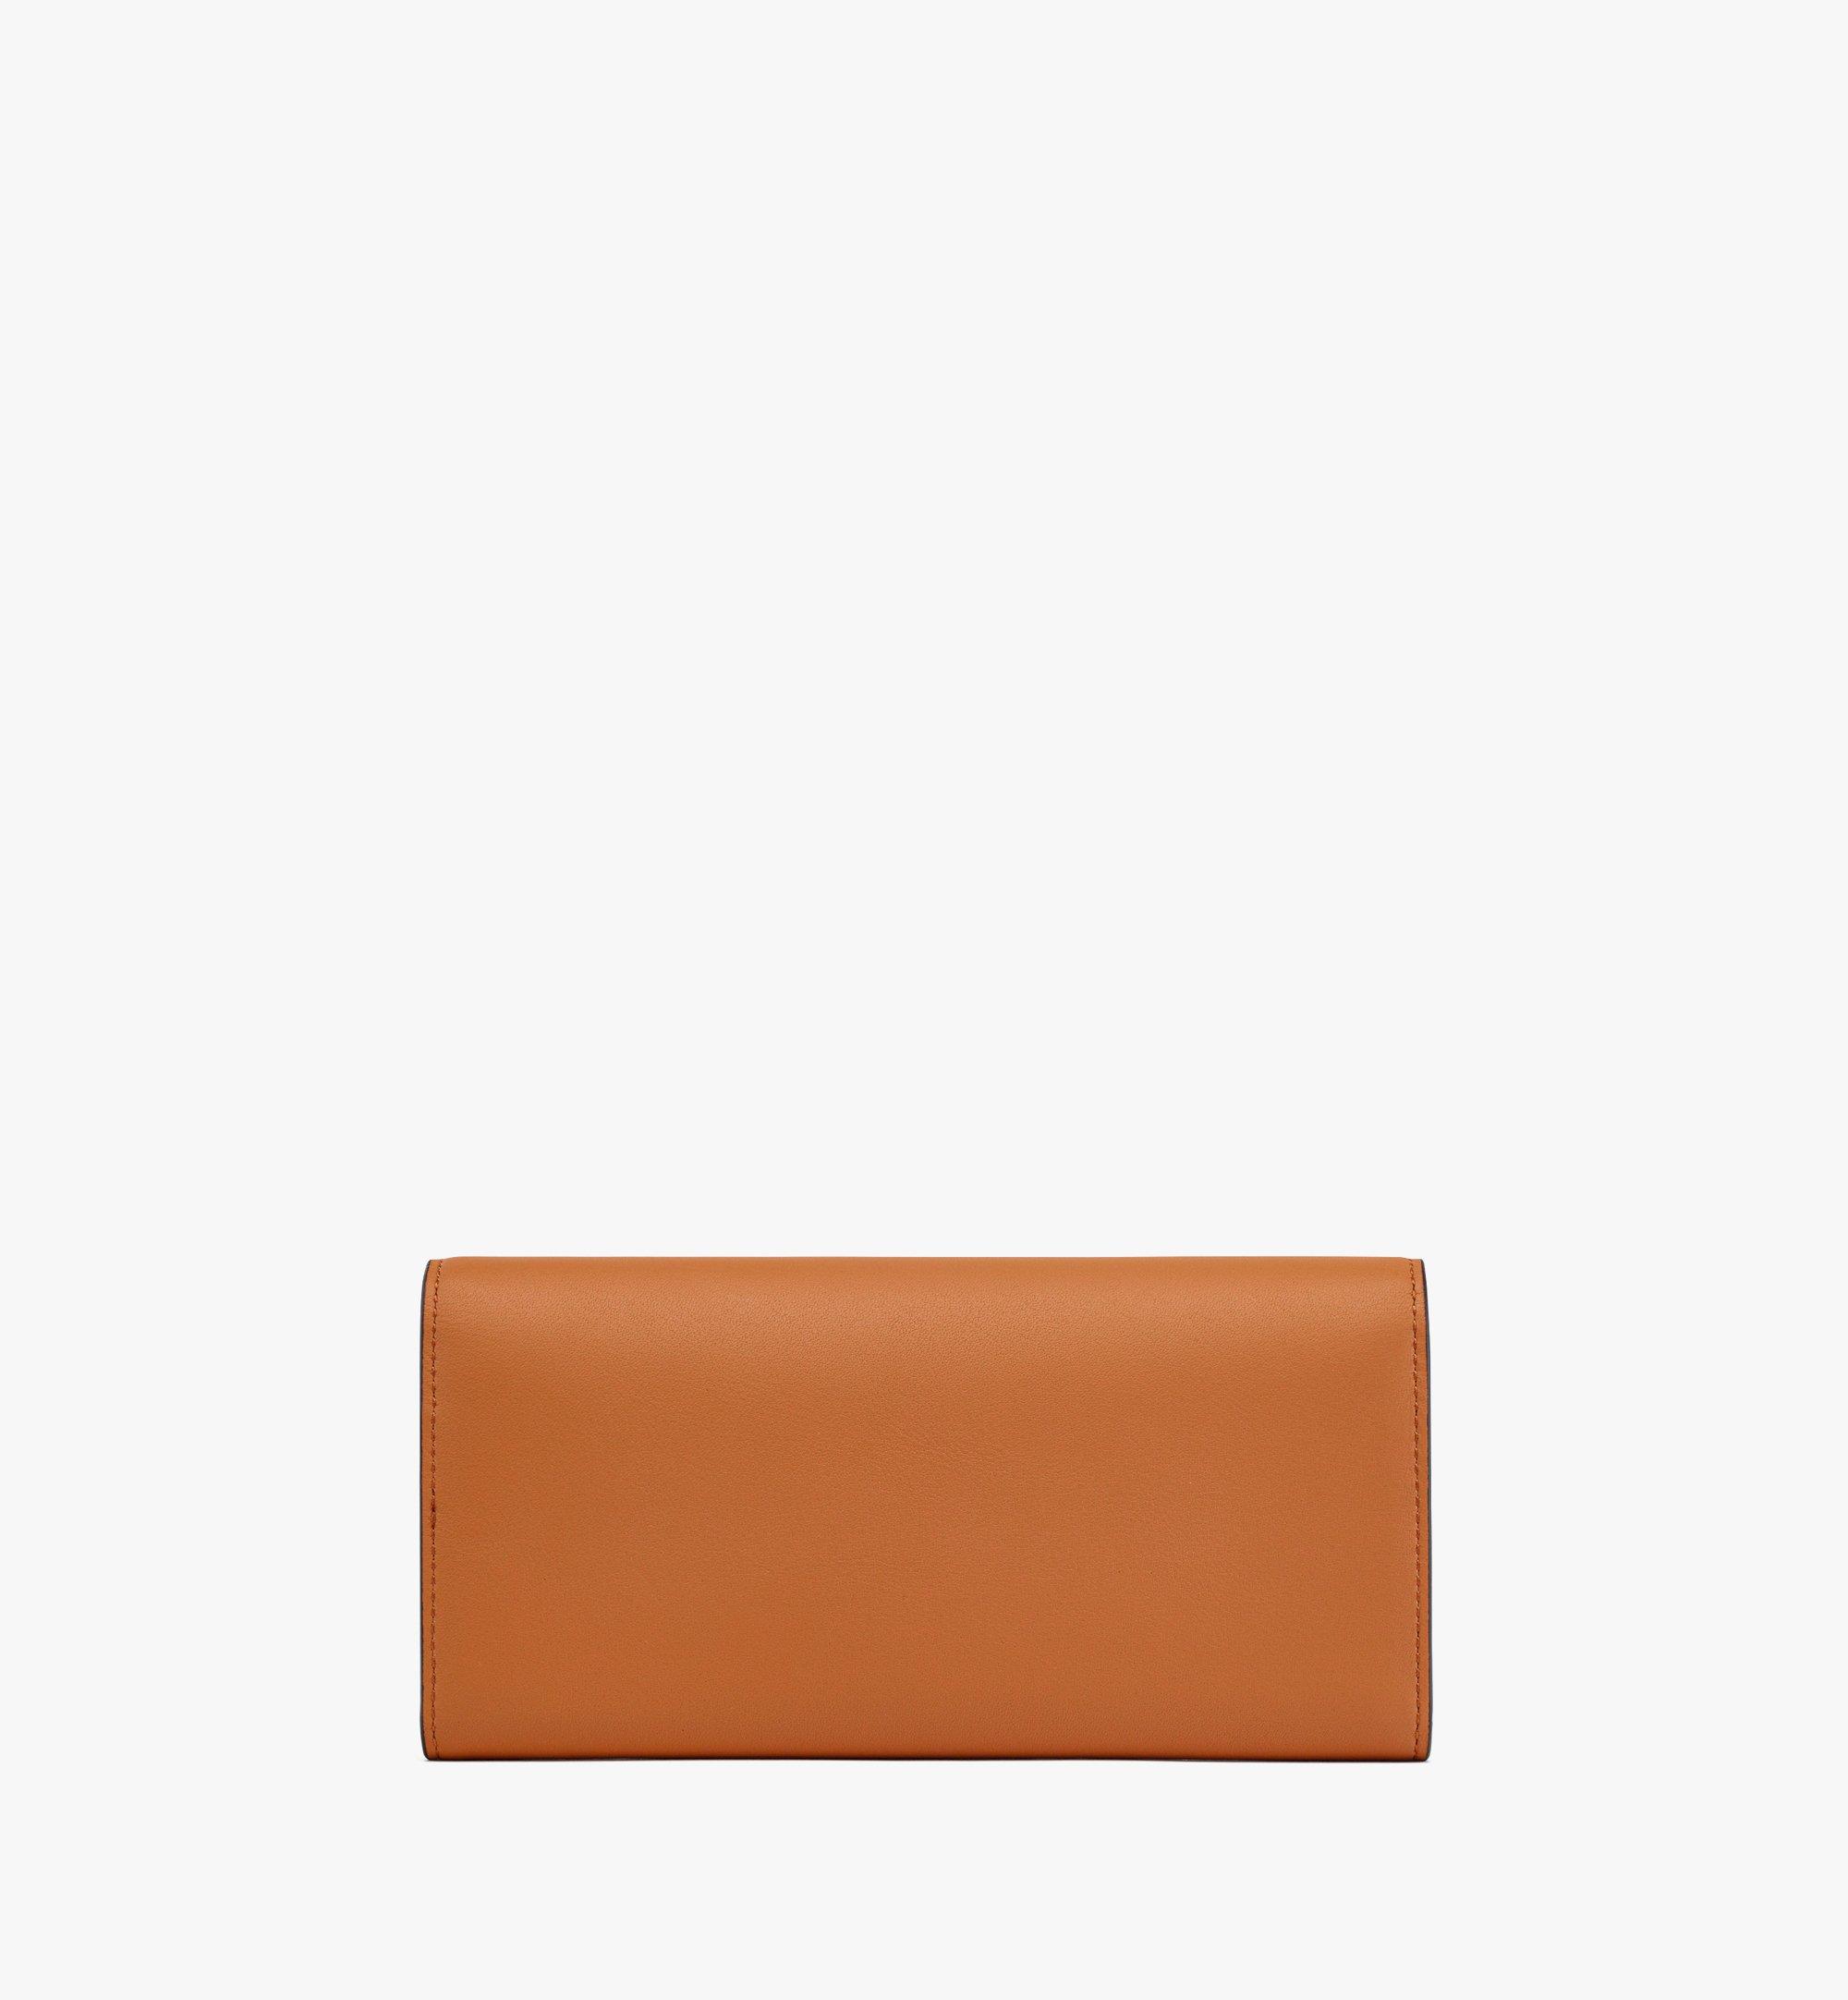 MCM Aren Continental Wallet in Spanish Calf Leather Cognac MYLDATA03CO001 Alternate View 2